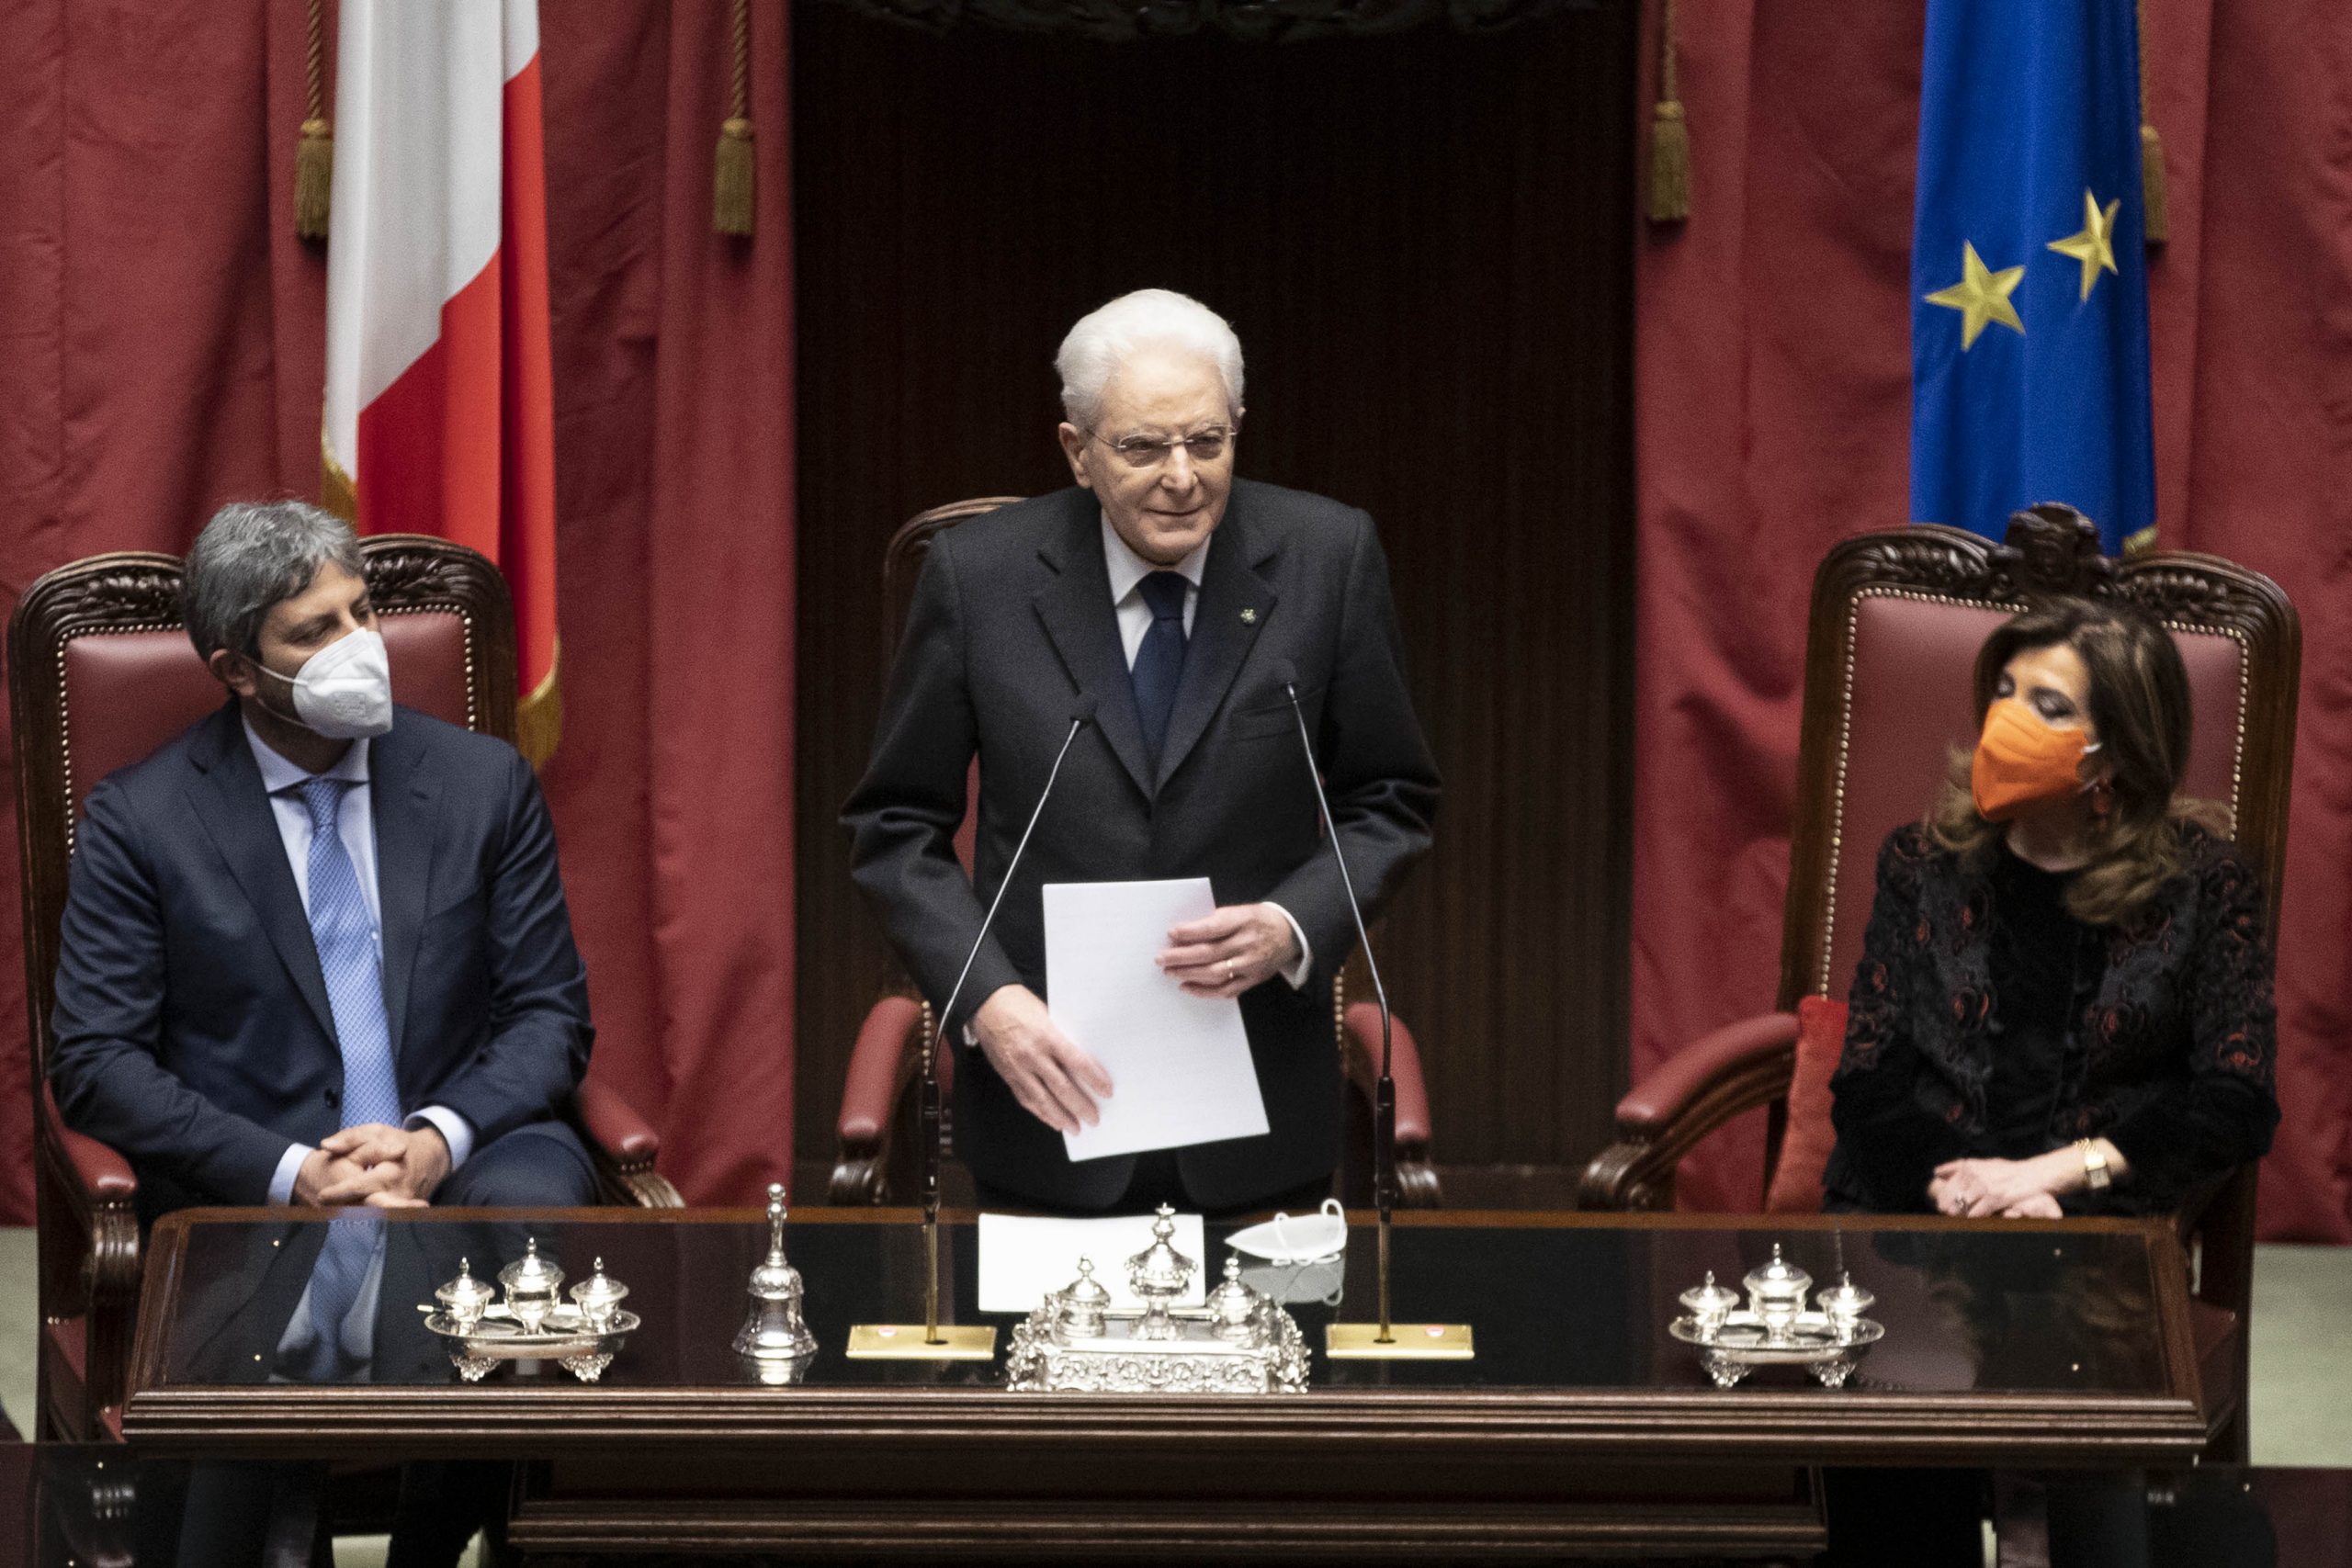 Mattarella re-elected: what it means for Italy and the EU